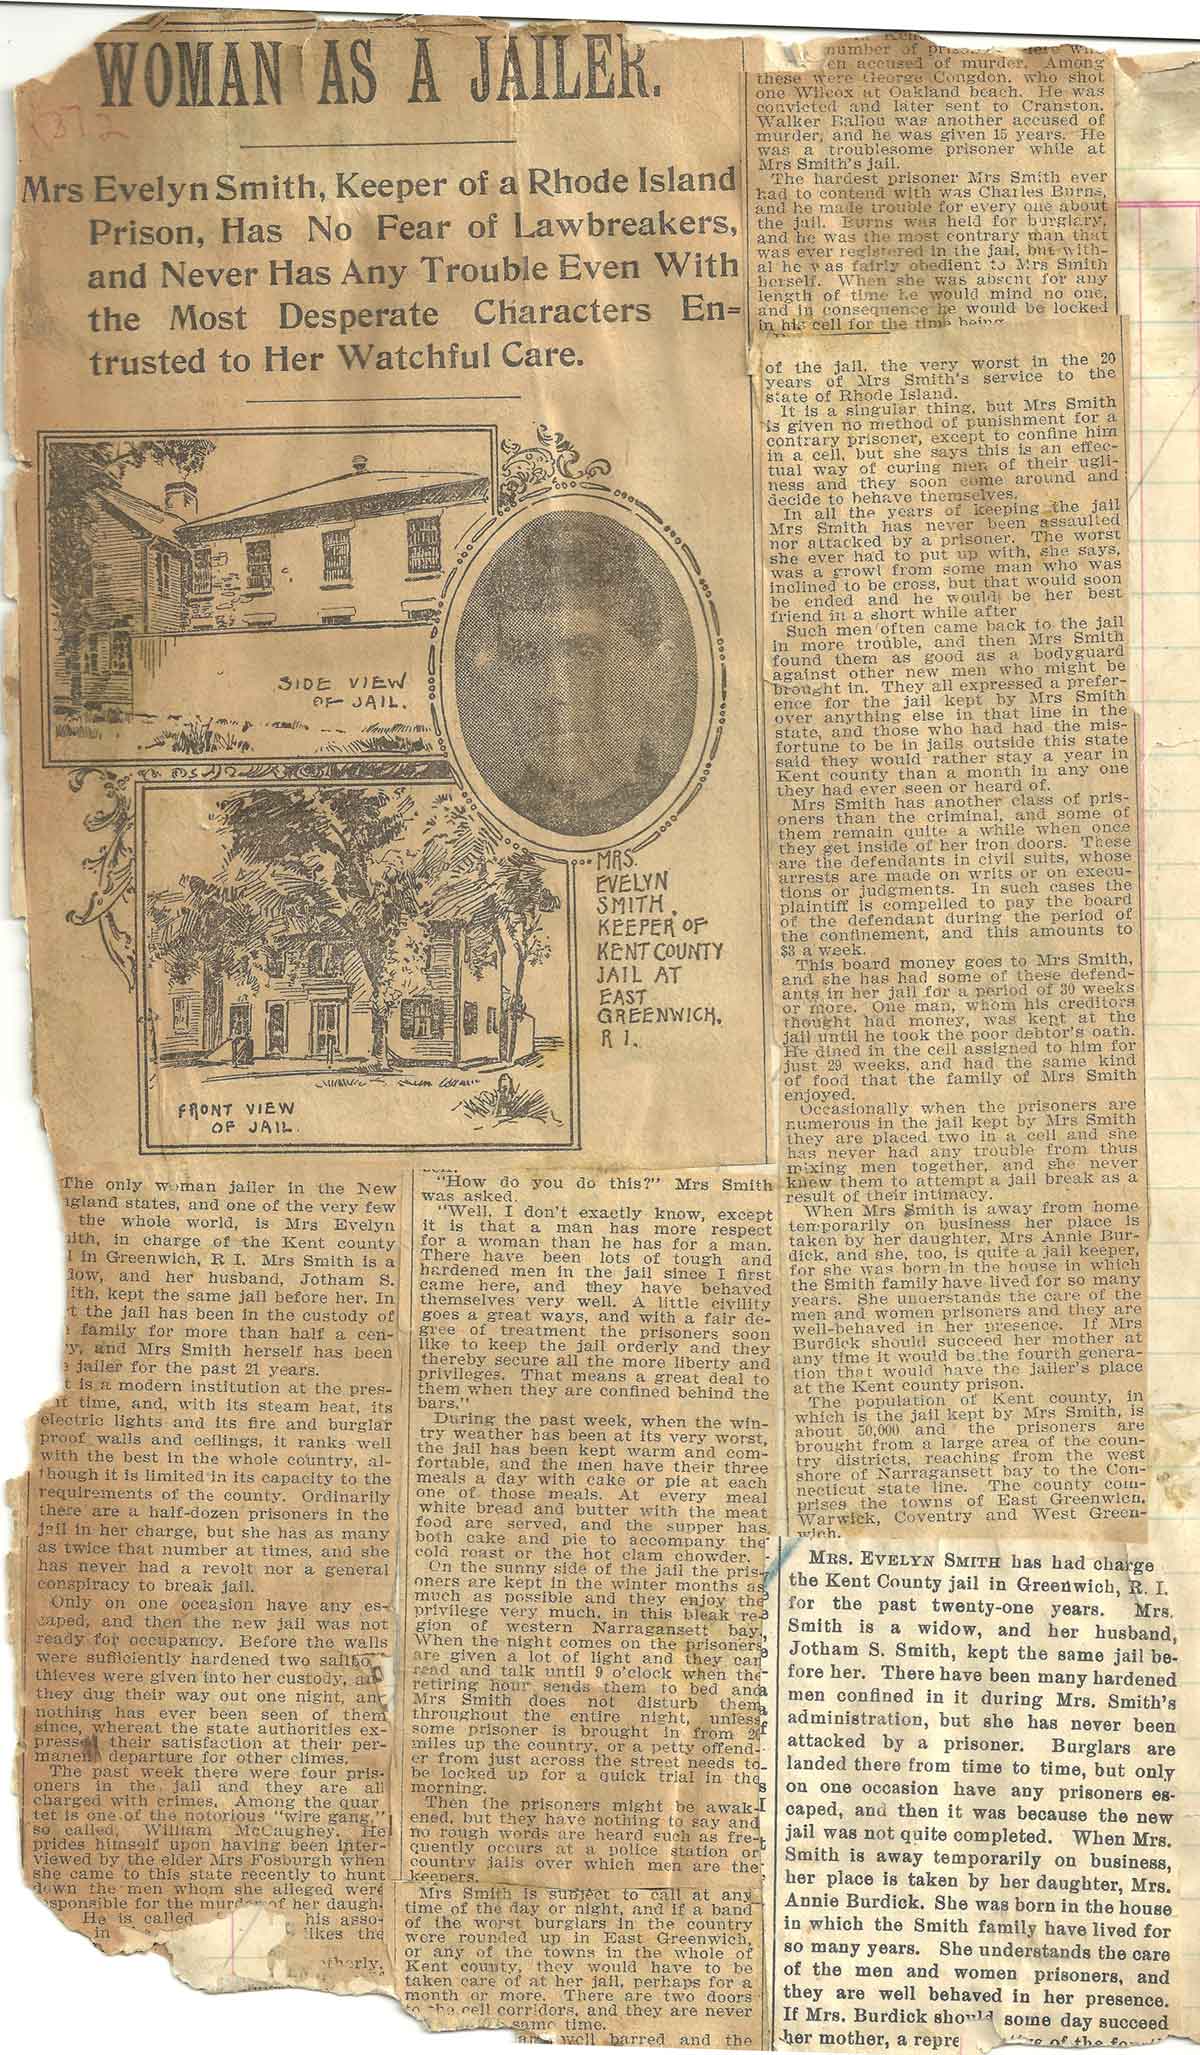 Scrapbook clipping about Mrs. Evelyn Smith, Keeper of a Rhode Island Prison.